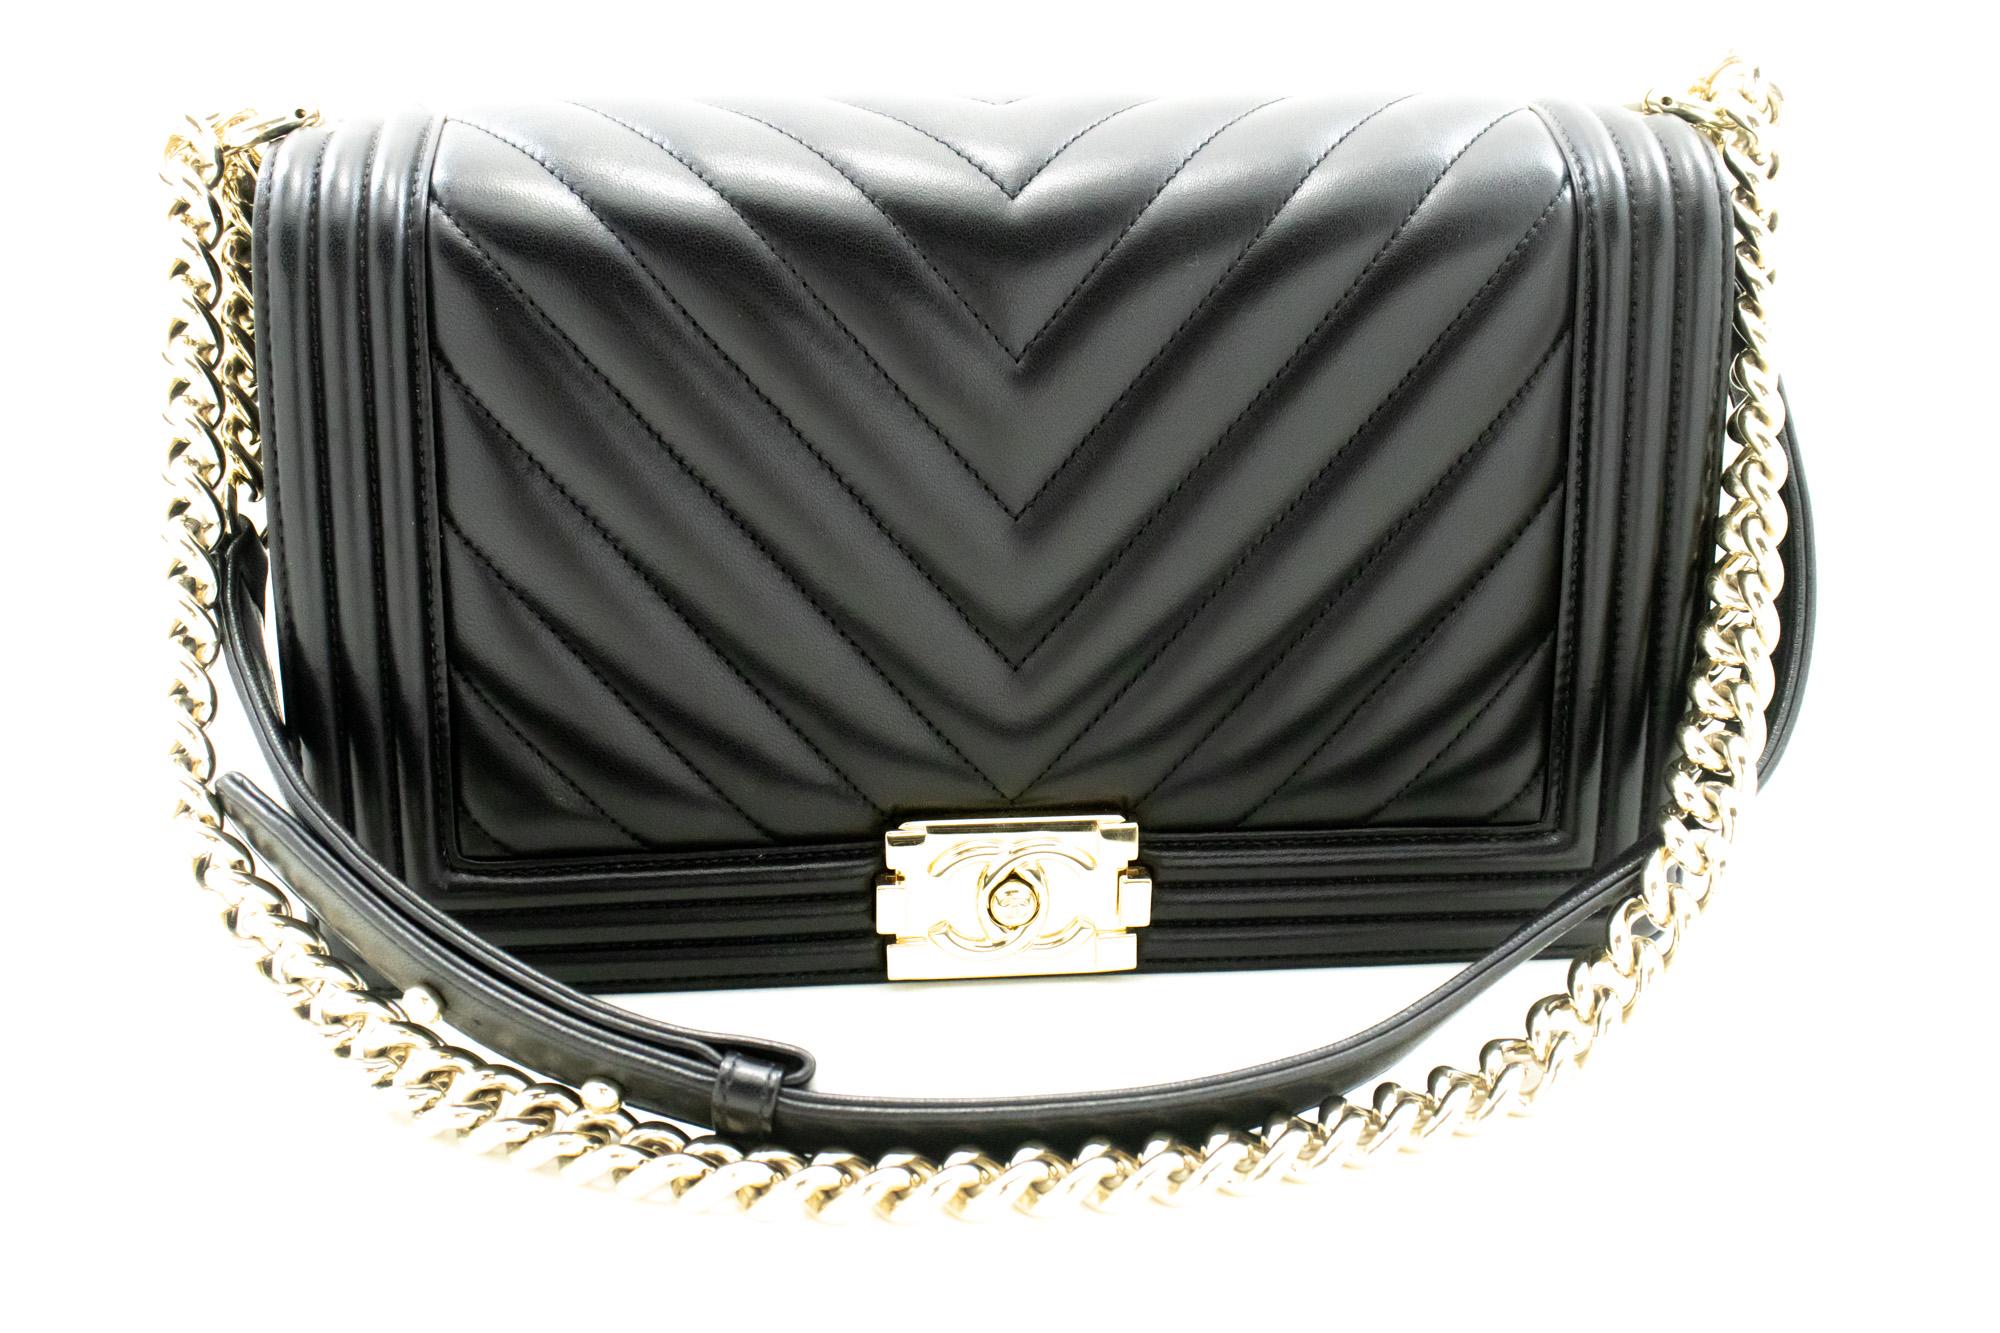 An authentic CHANEL Boy V-Stitch Chain Shoulder Bag Black Quilted Flap Calfskin. The color is Black. The outside material is Leather. The pattern is Solid. This item is Contemporary. The year of manufacture would be 2016.
Conditions &